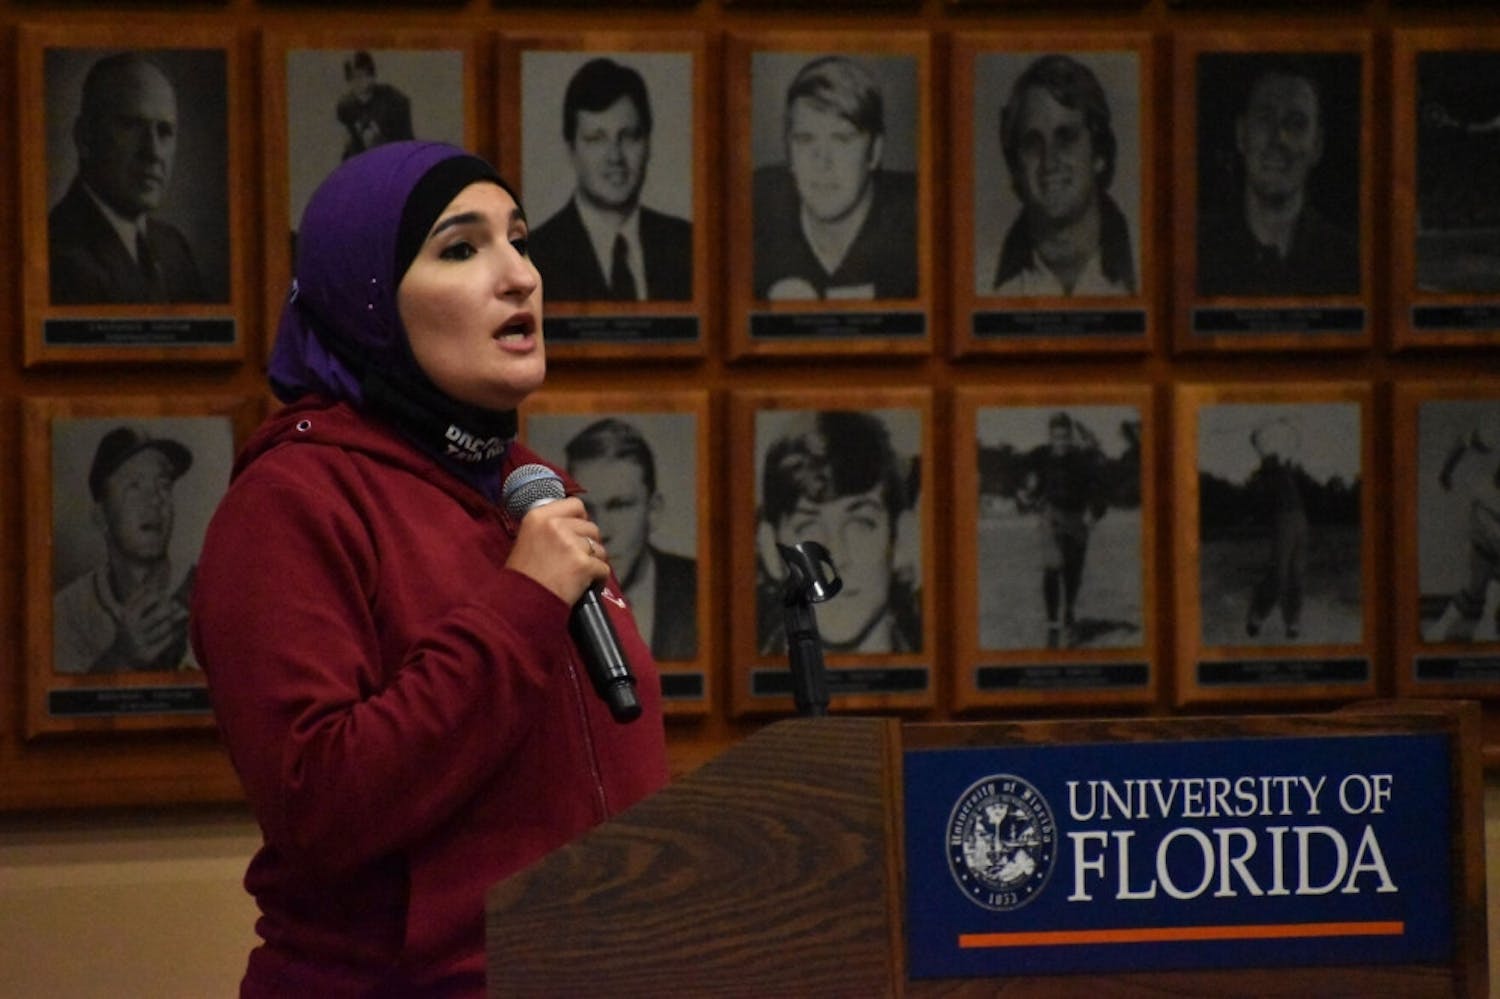 Linda Sarsour, a political activist known for her role as co-chair of the 2017 Women’s March, speaks to UF students Tuesday night, Oct. 27, 2020, about the intersection between resistance and Islam at the Touchdown Terrace.&nbsp;